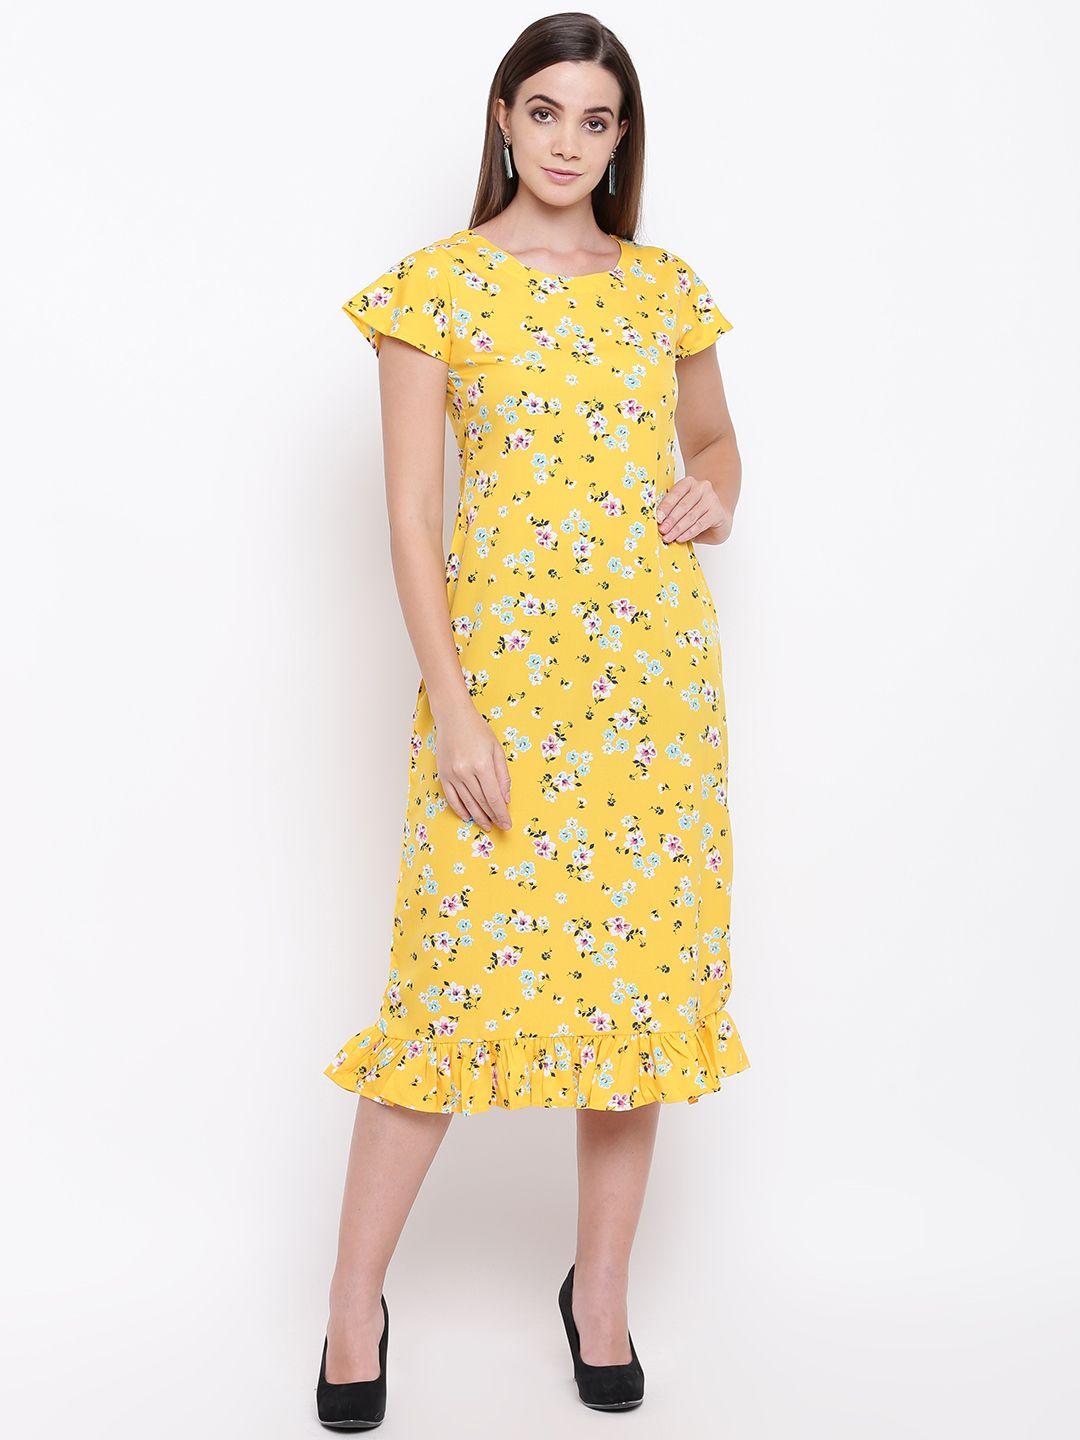 raano women yellow & off-white floral print a-line dress